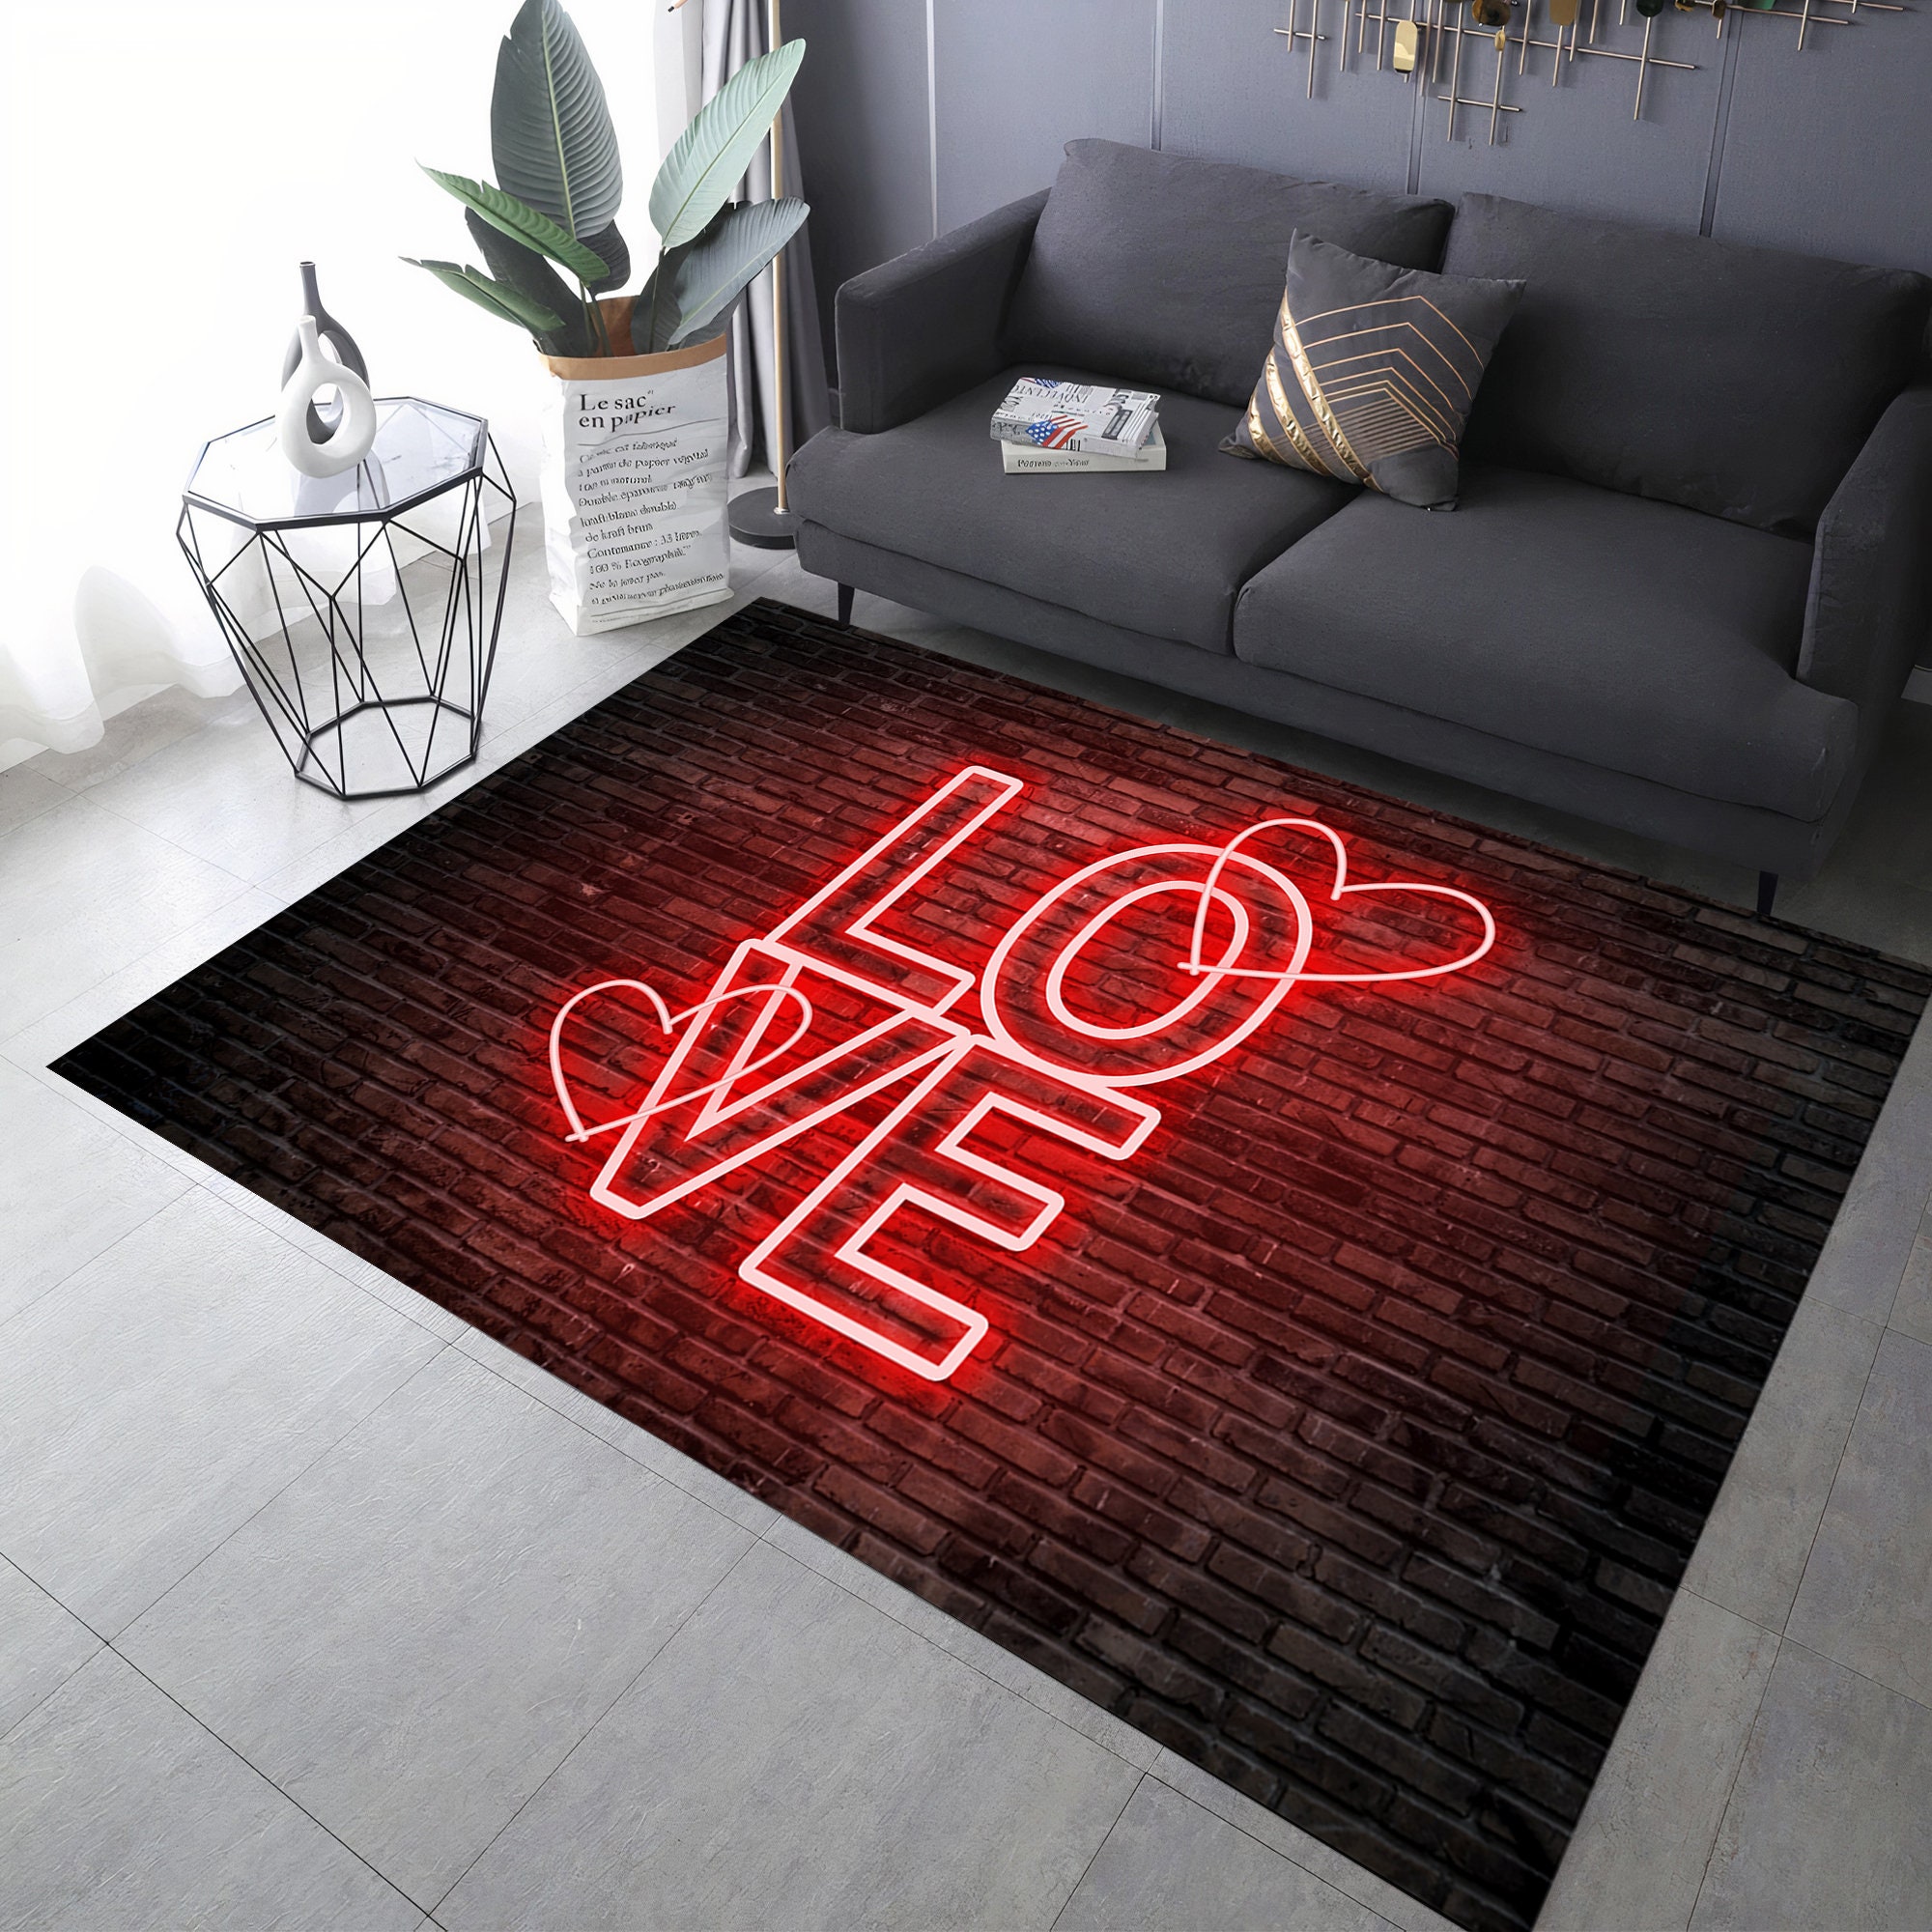 Discover Heart Theme Rug, Love Themed Rug, Sparkly Rug, Red Rose Rug, Valentine's Day Rug, Valentines Day, Valentines Rug, Love Rug, Romantic Rug